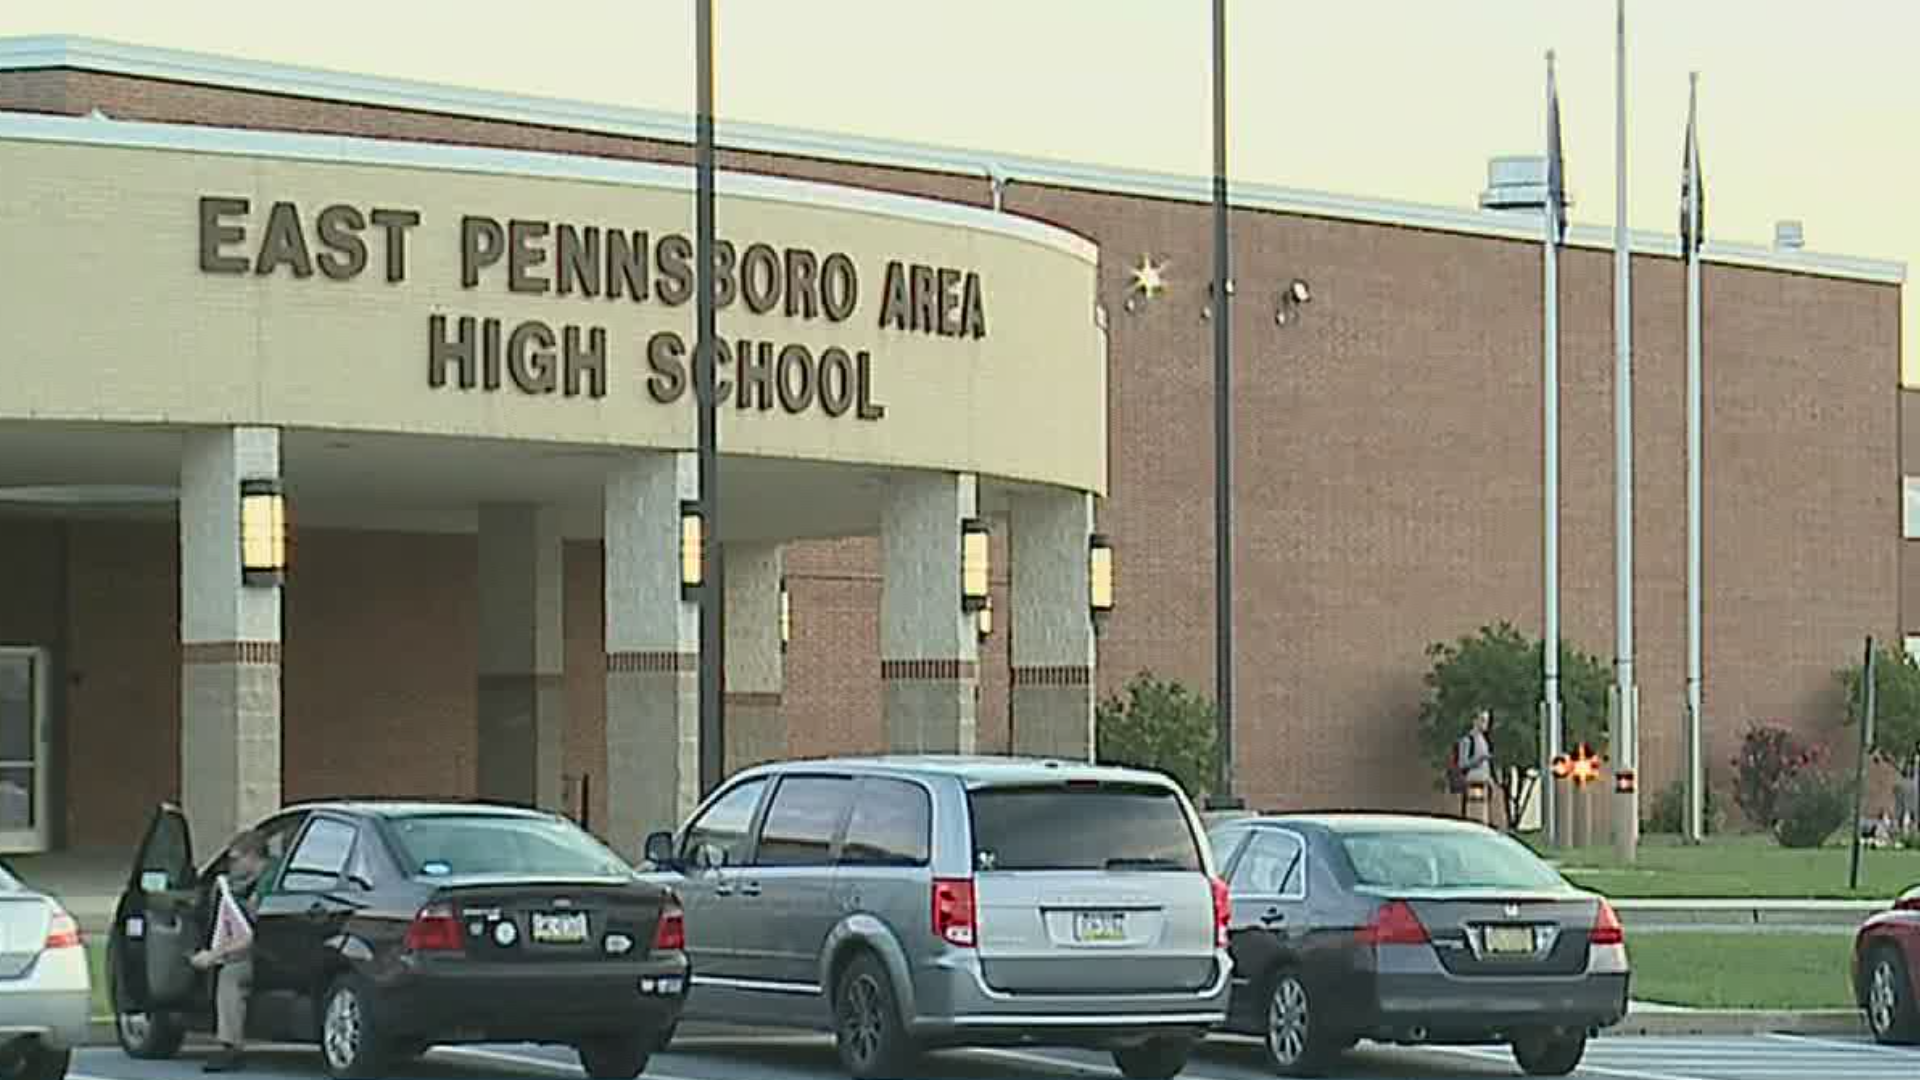 East Pennsboro Area planned to start the 2020-2021 school year on a hybrid schedule. They hope to move to hybrid before the end of the first marking period.